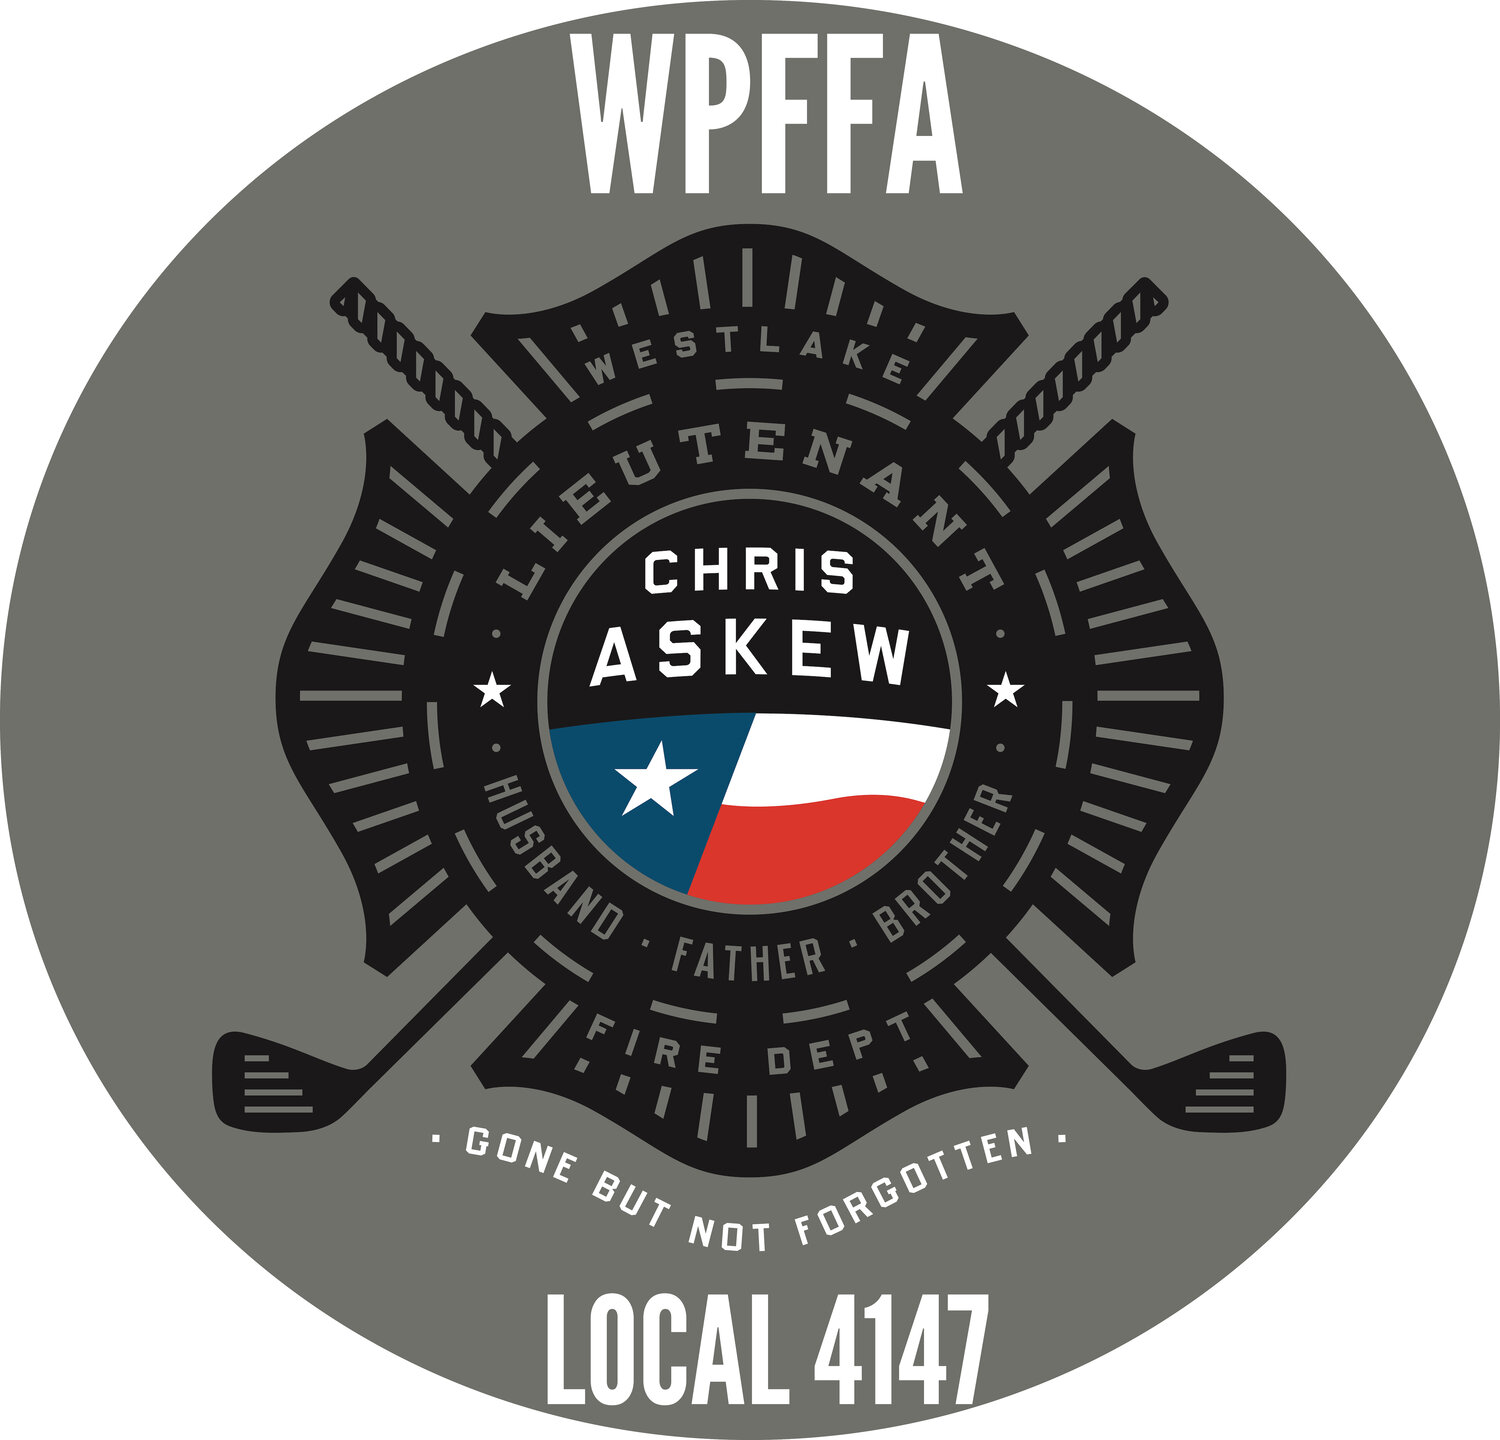 Westlake Professional Firefighters Association - Local 4147